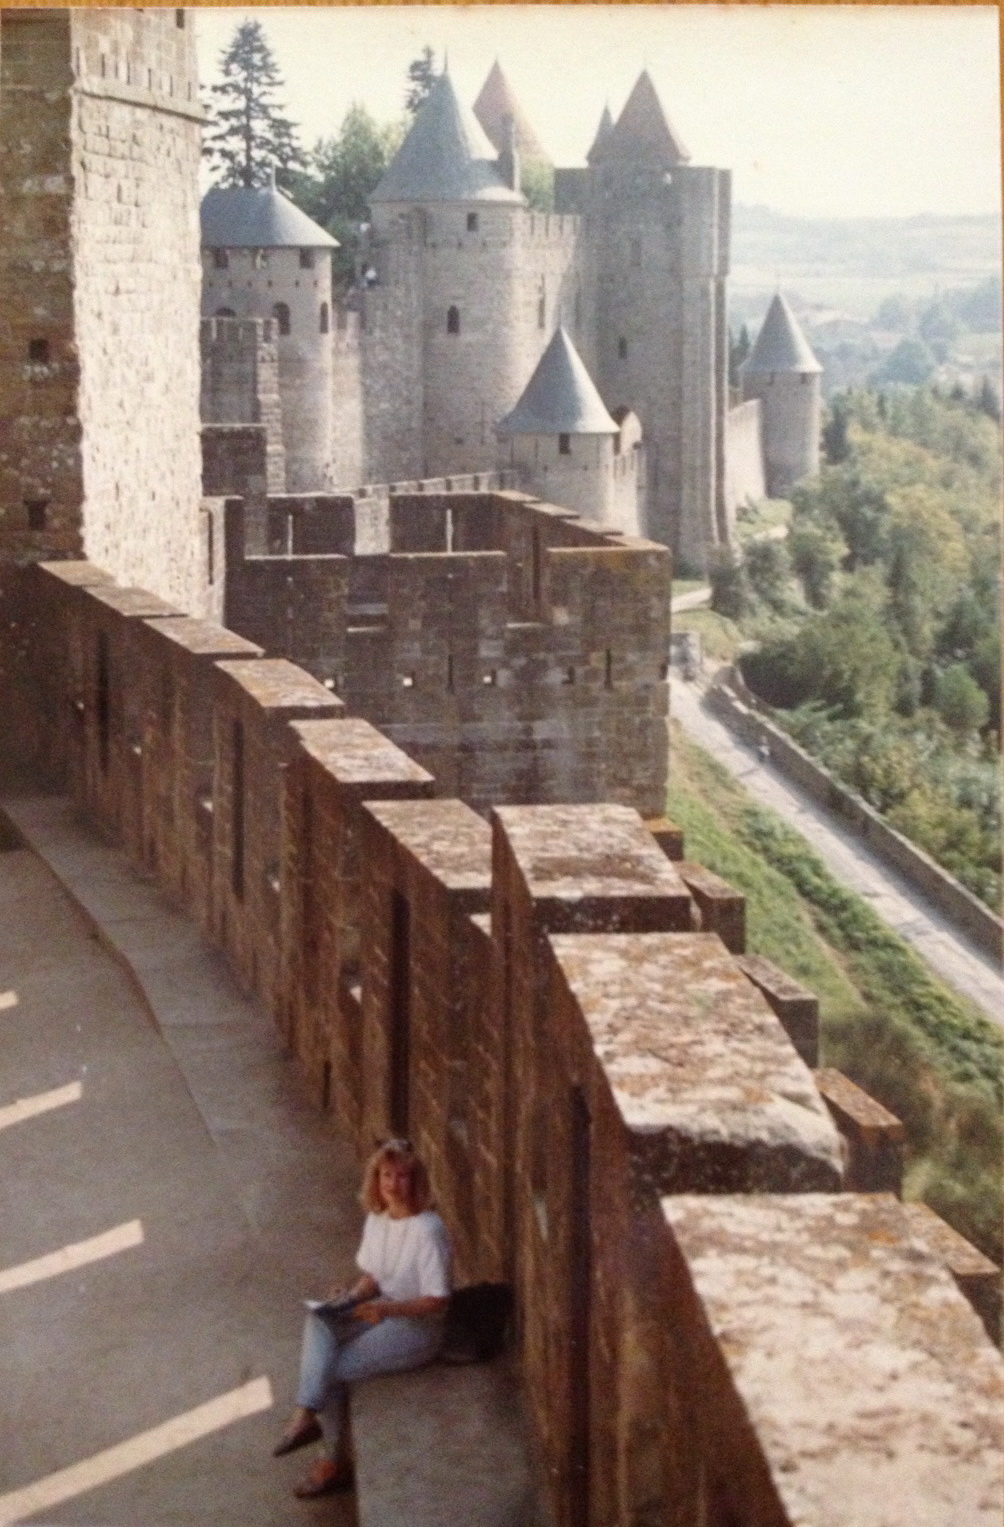 Deb Carcassonne cropped